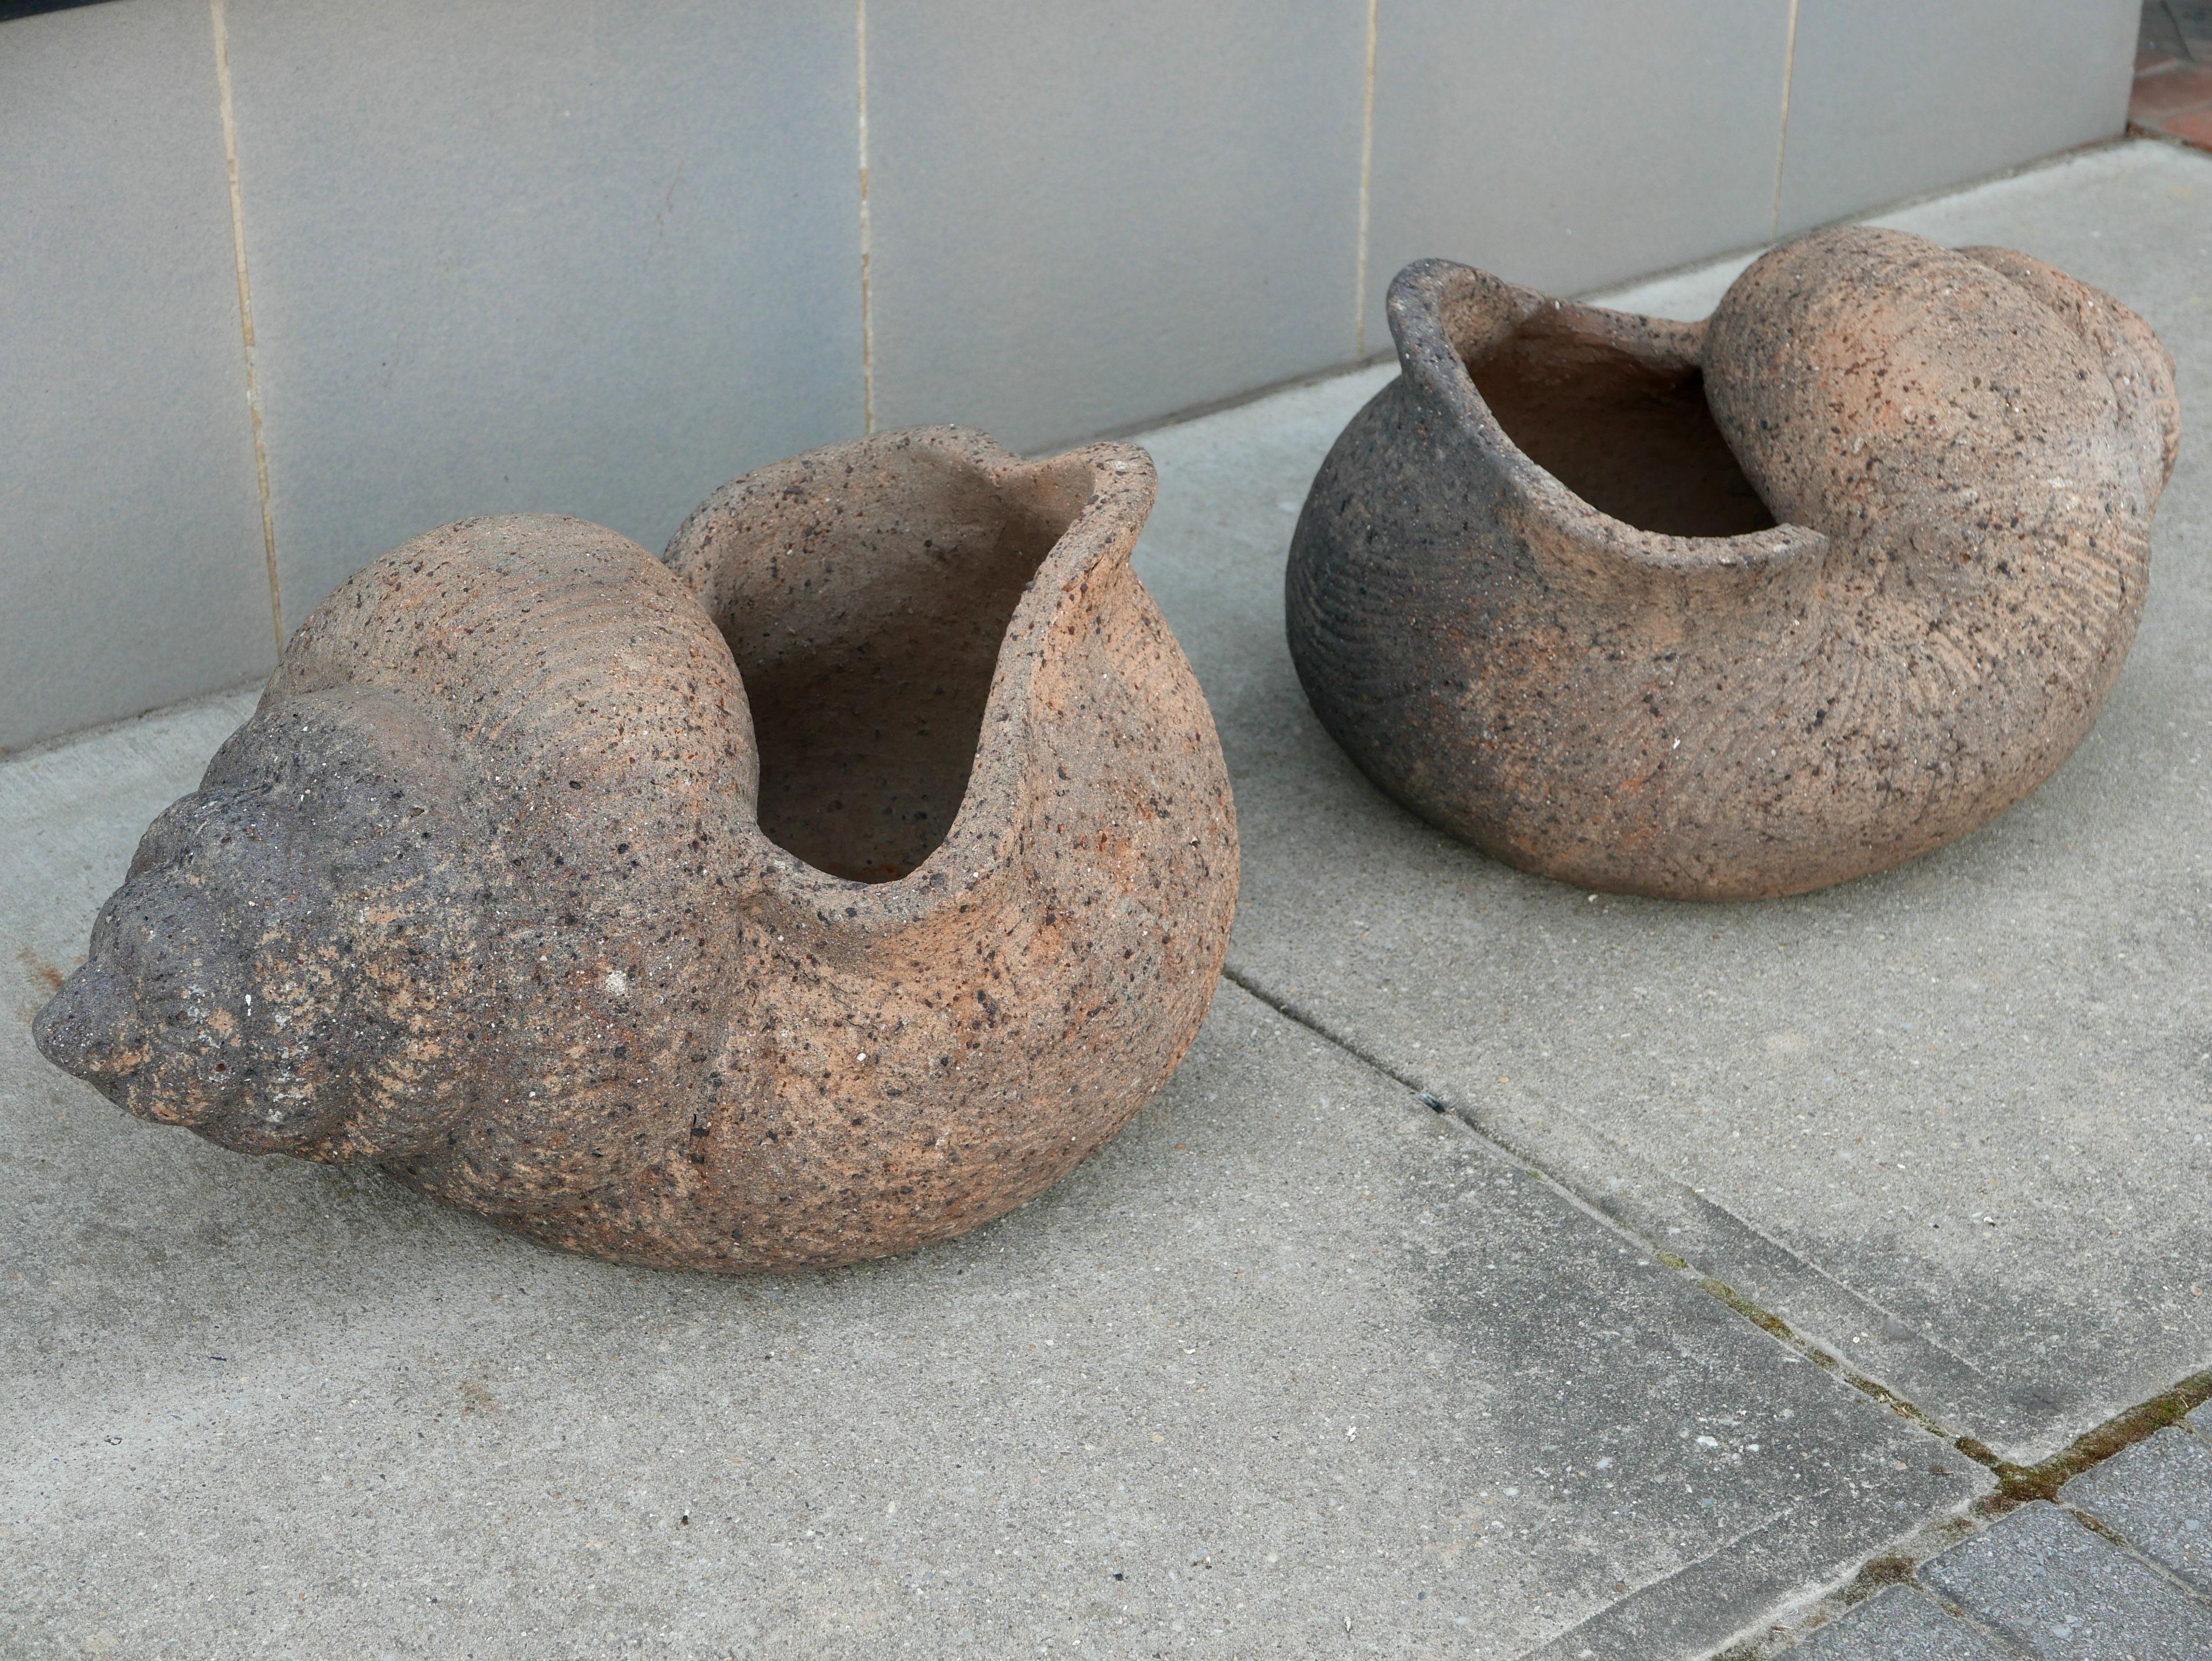 A stunning set of large 1930s terracotta shell-shaped planters with gorgeous age acquired patina. Most likely from a large resort as I've never seen anything like this before.